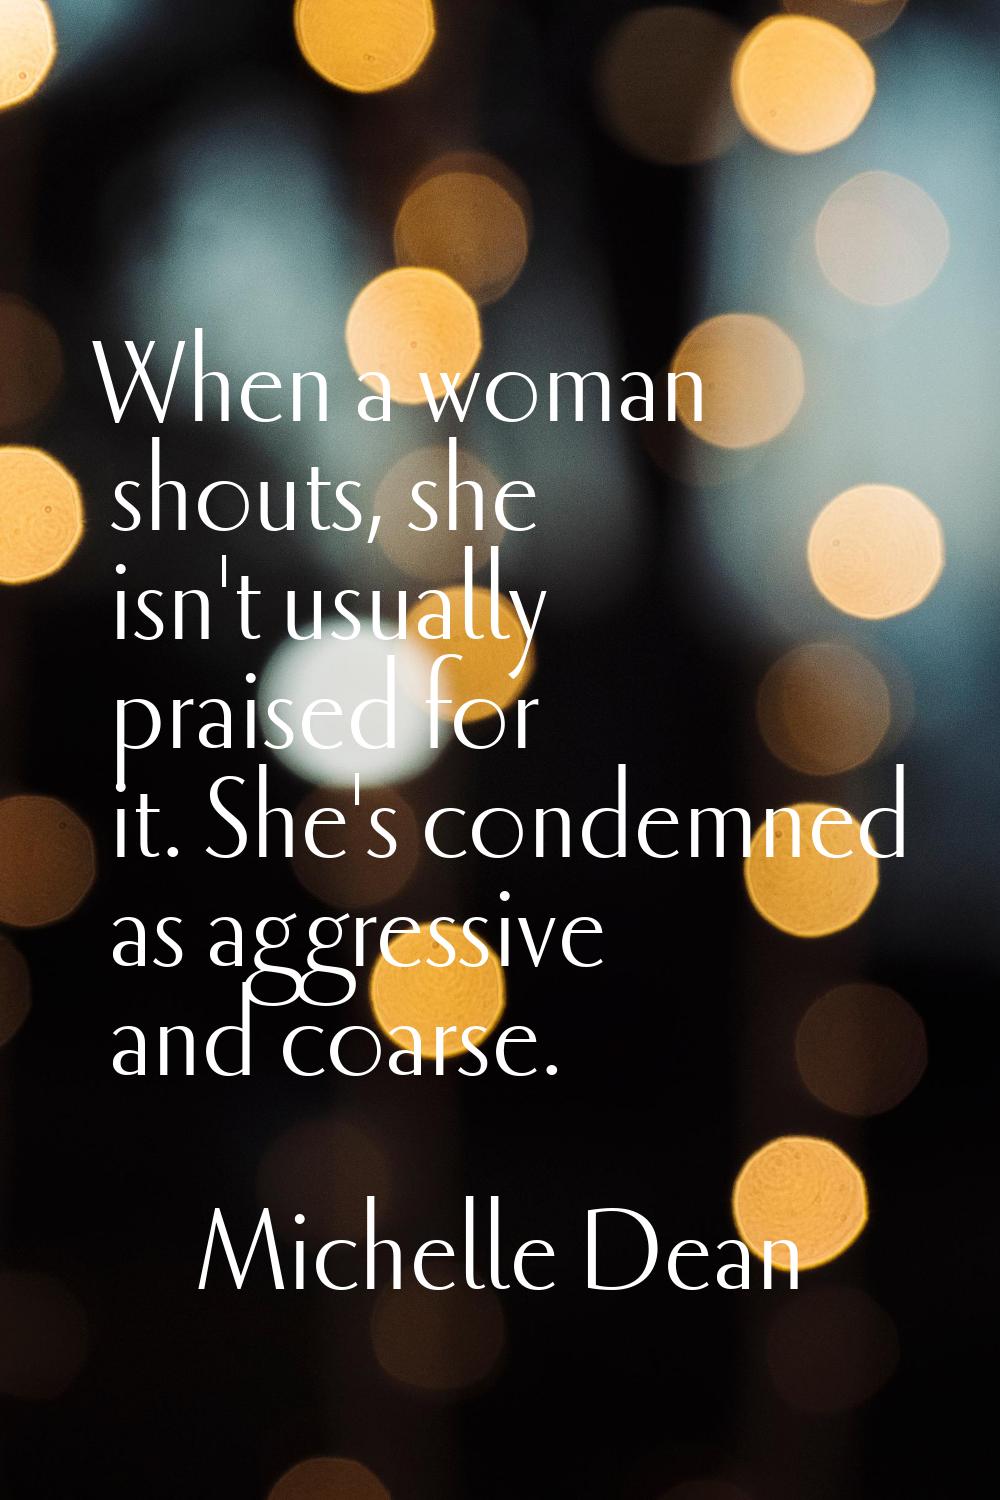 When a woman shouts, she isn't usually praised for it. She's condemned as aggressive and coarse.